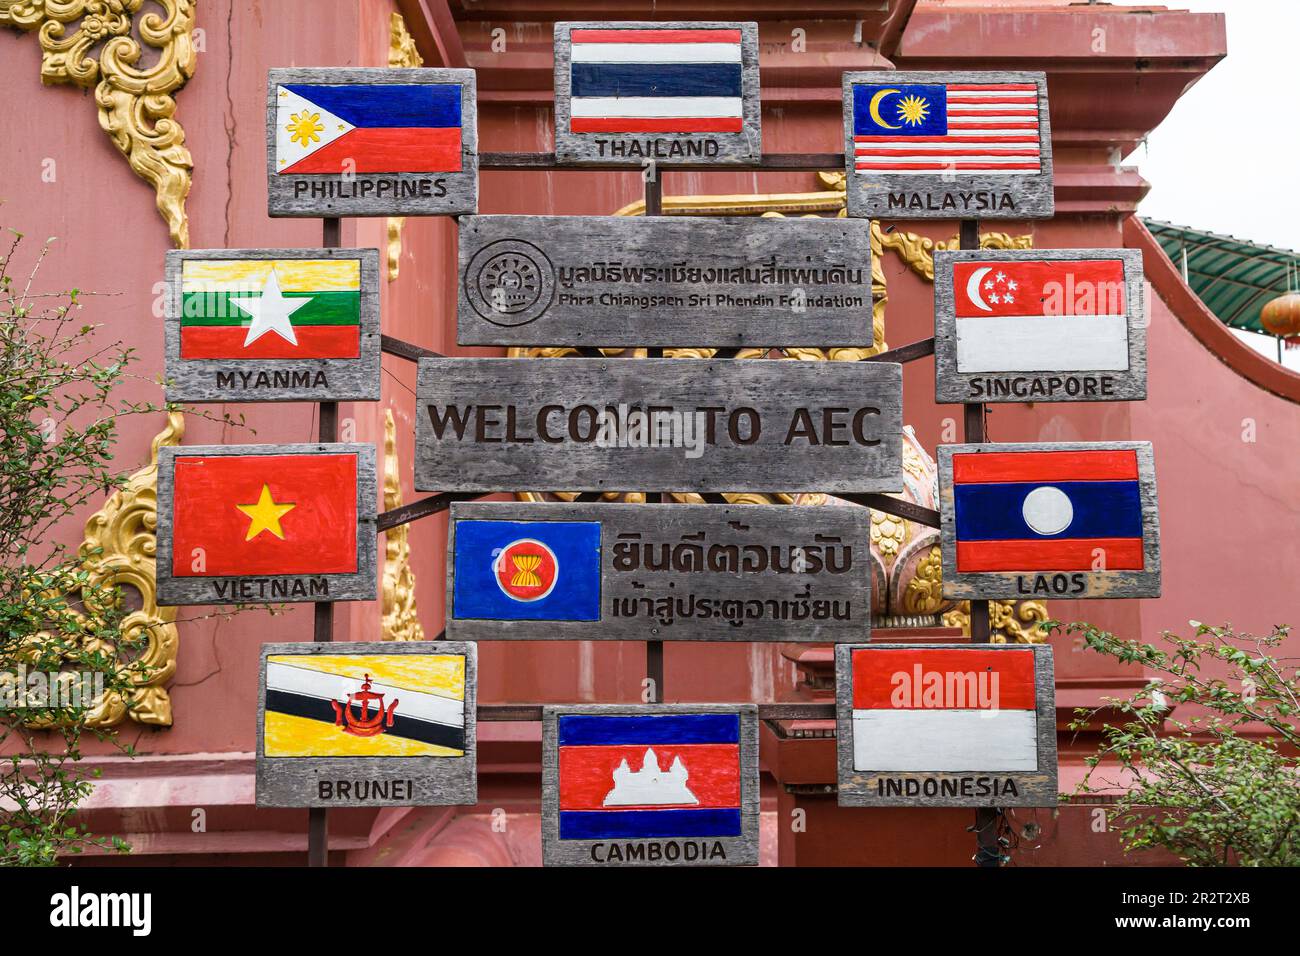 Sop Ruak, Thailand - September 7, 2018: AEC (ASEAN Economic Community) welcome board with the flags of its constituents in Sop Ruak, Golden Triangle,T Stock Photo